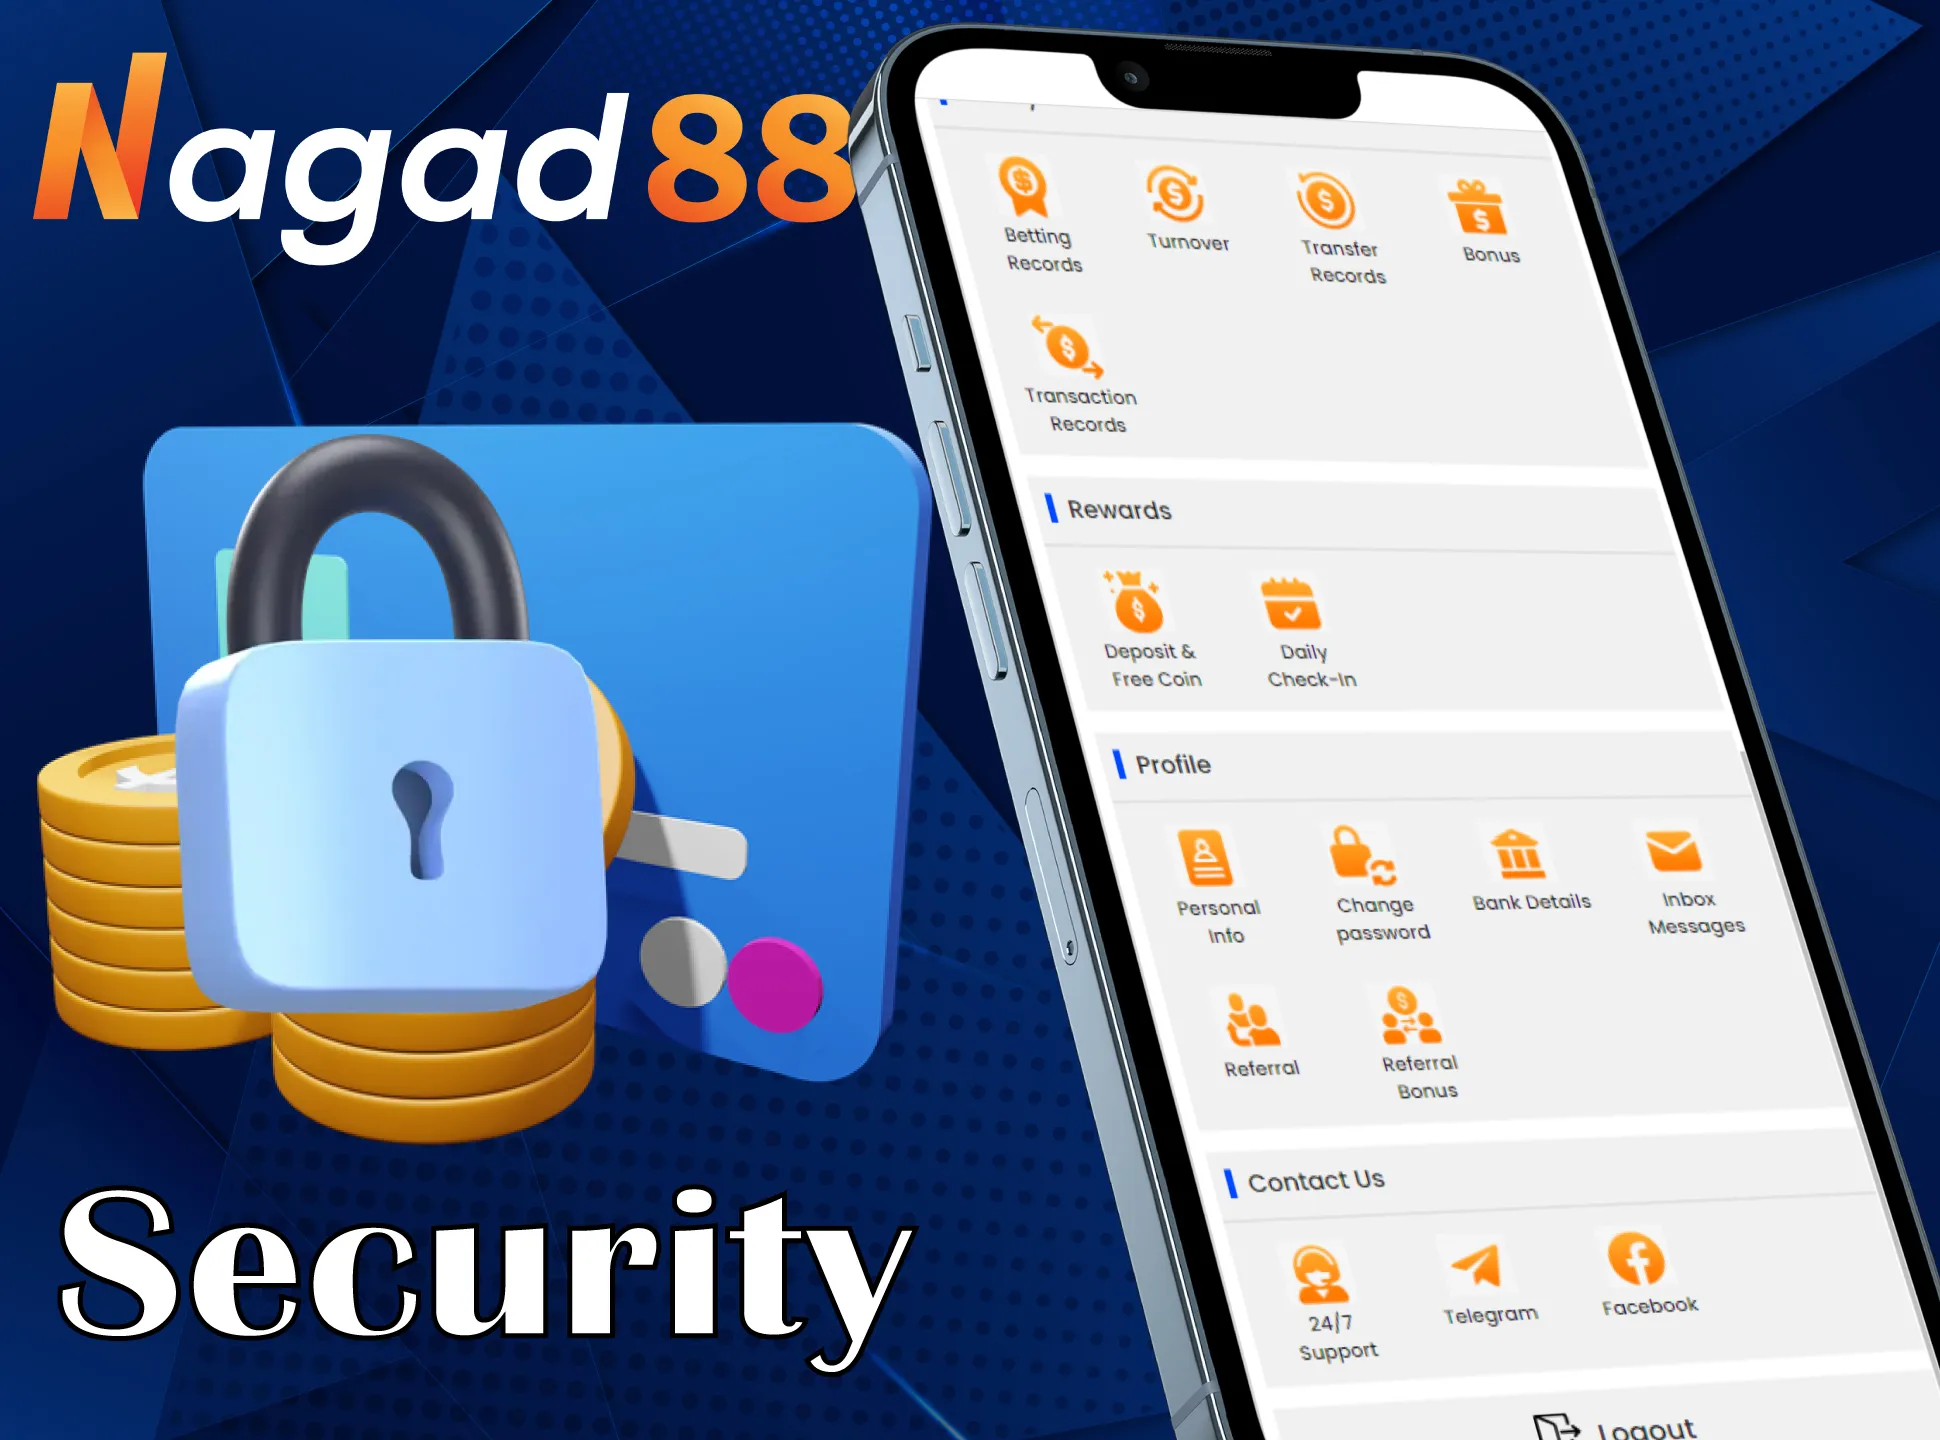 In the Nagad88 app, all user data is secure.